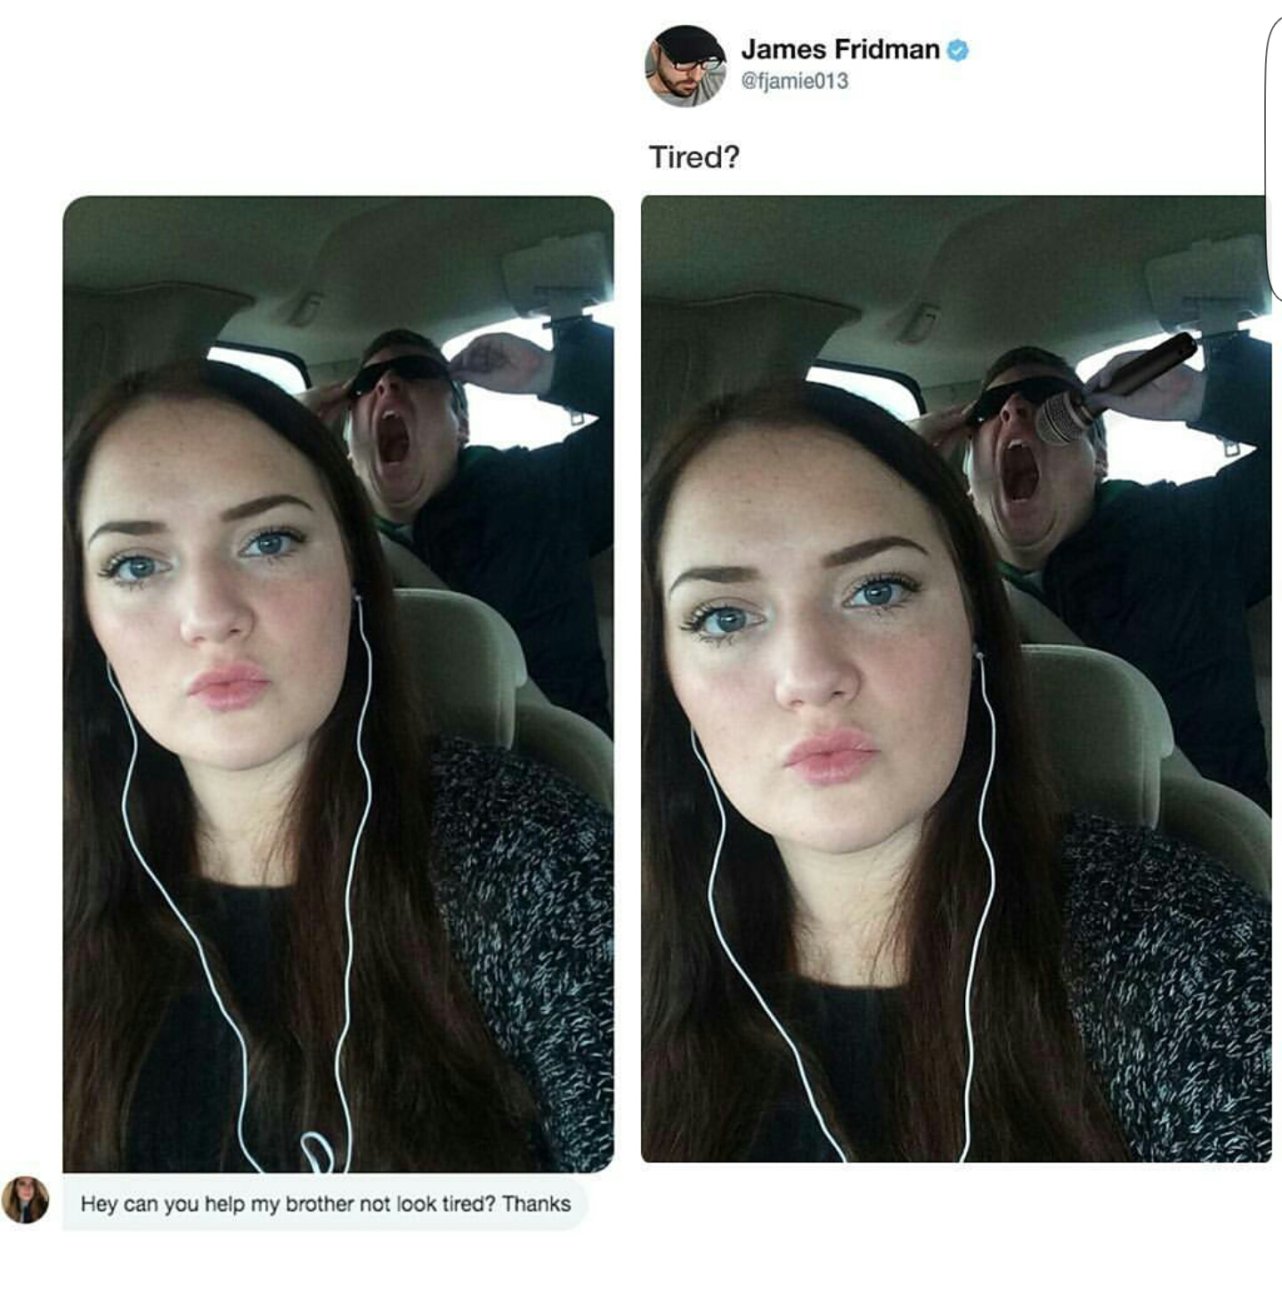 james fridman - James Fridman Tired? Hey can you help my brother not look tired? Thanks